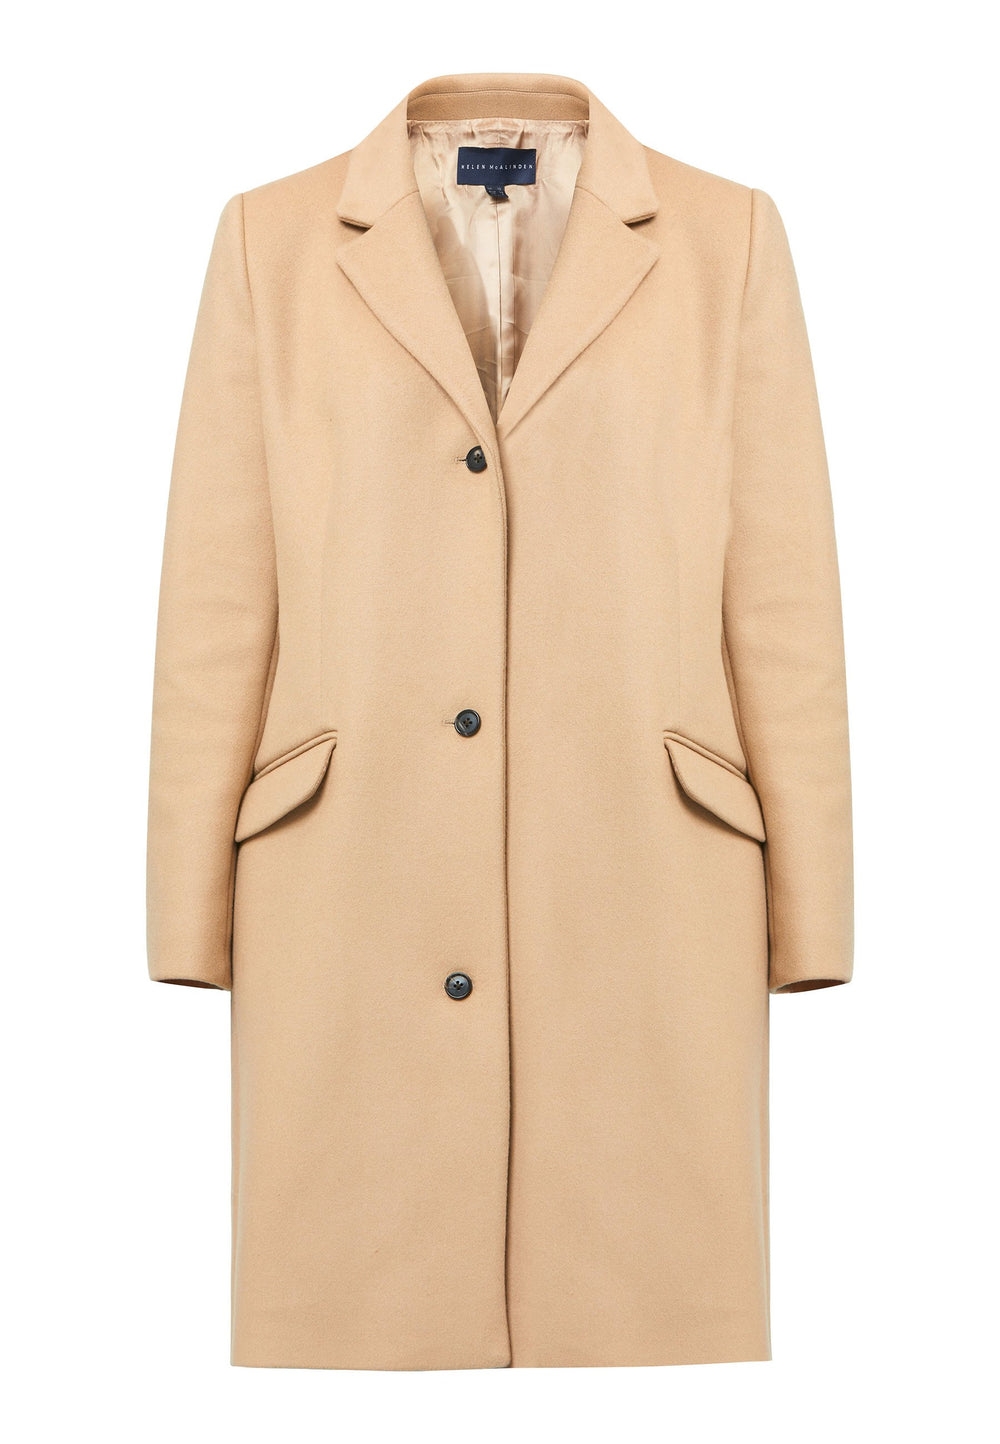 Expertly crafted from a luxurious wool and cashmere blend melton, this knee-length coat offers both warmth and sophistication. It showcases a tidy collar and revere design. With a three-button finish and practical pockets, this coat effortlessly combines functionality with style. 